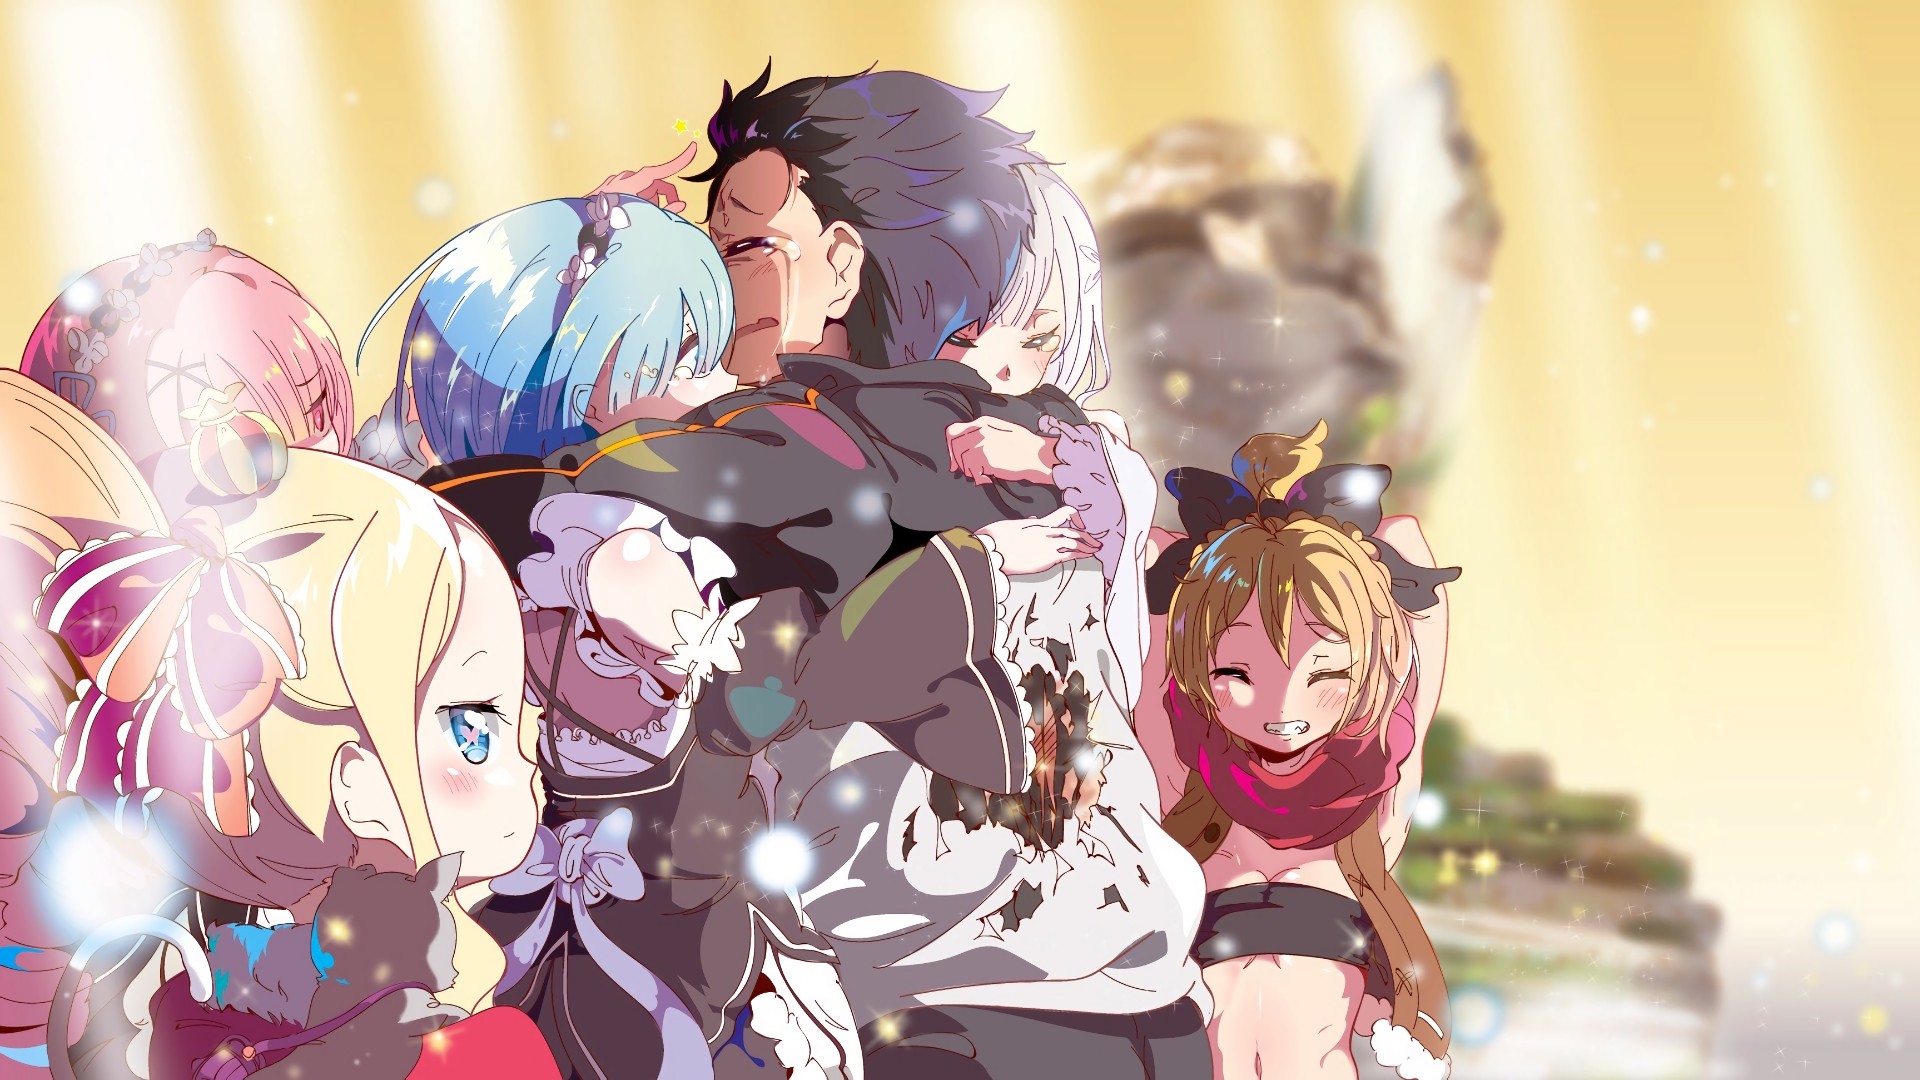 Re:Zero wallpaper ·① Download free cool HD wallpapers for desktop and